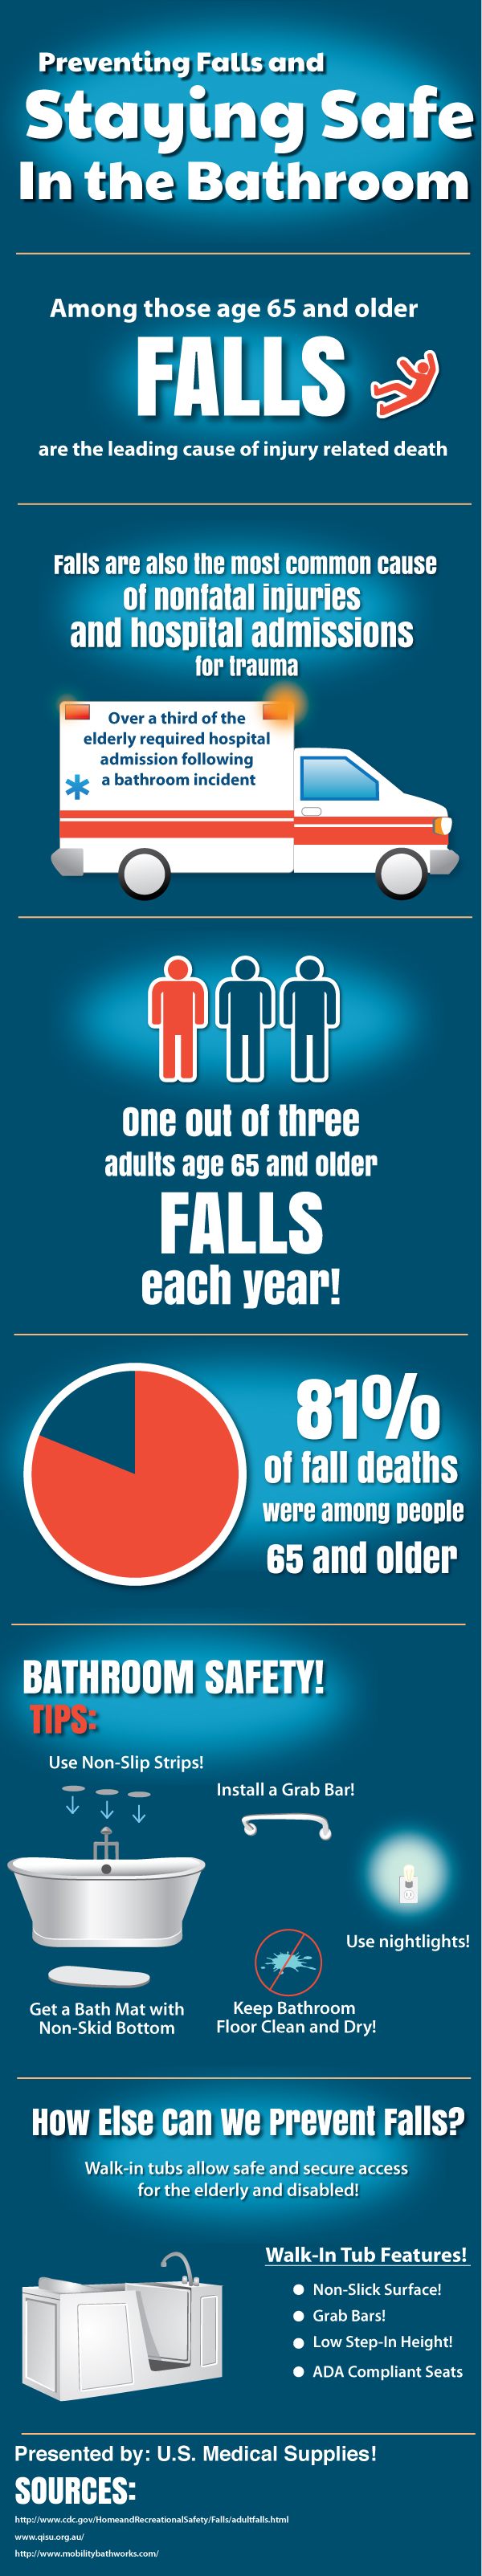 Falls are the leading cause of injury-related death among people over age 65. Don't become a statistic!